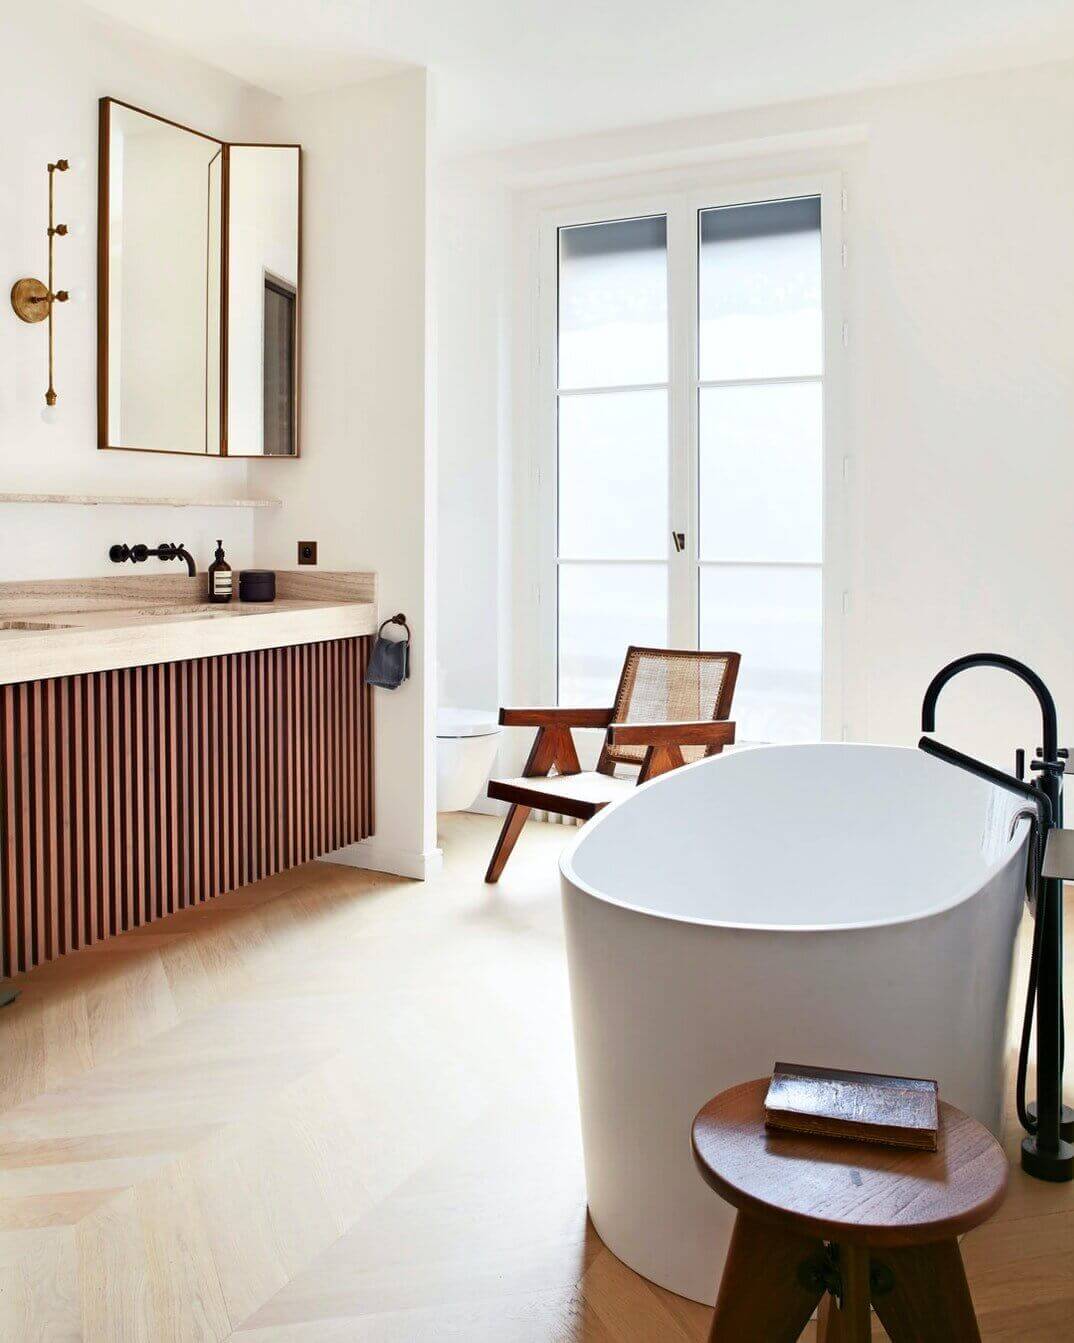 19th paris apartment modern classic design ribbed wood bathroom nordroom How To Style Your Home Like A Parisian Apartment